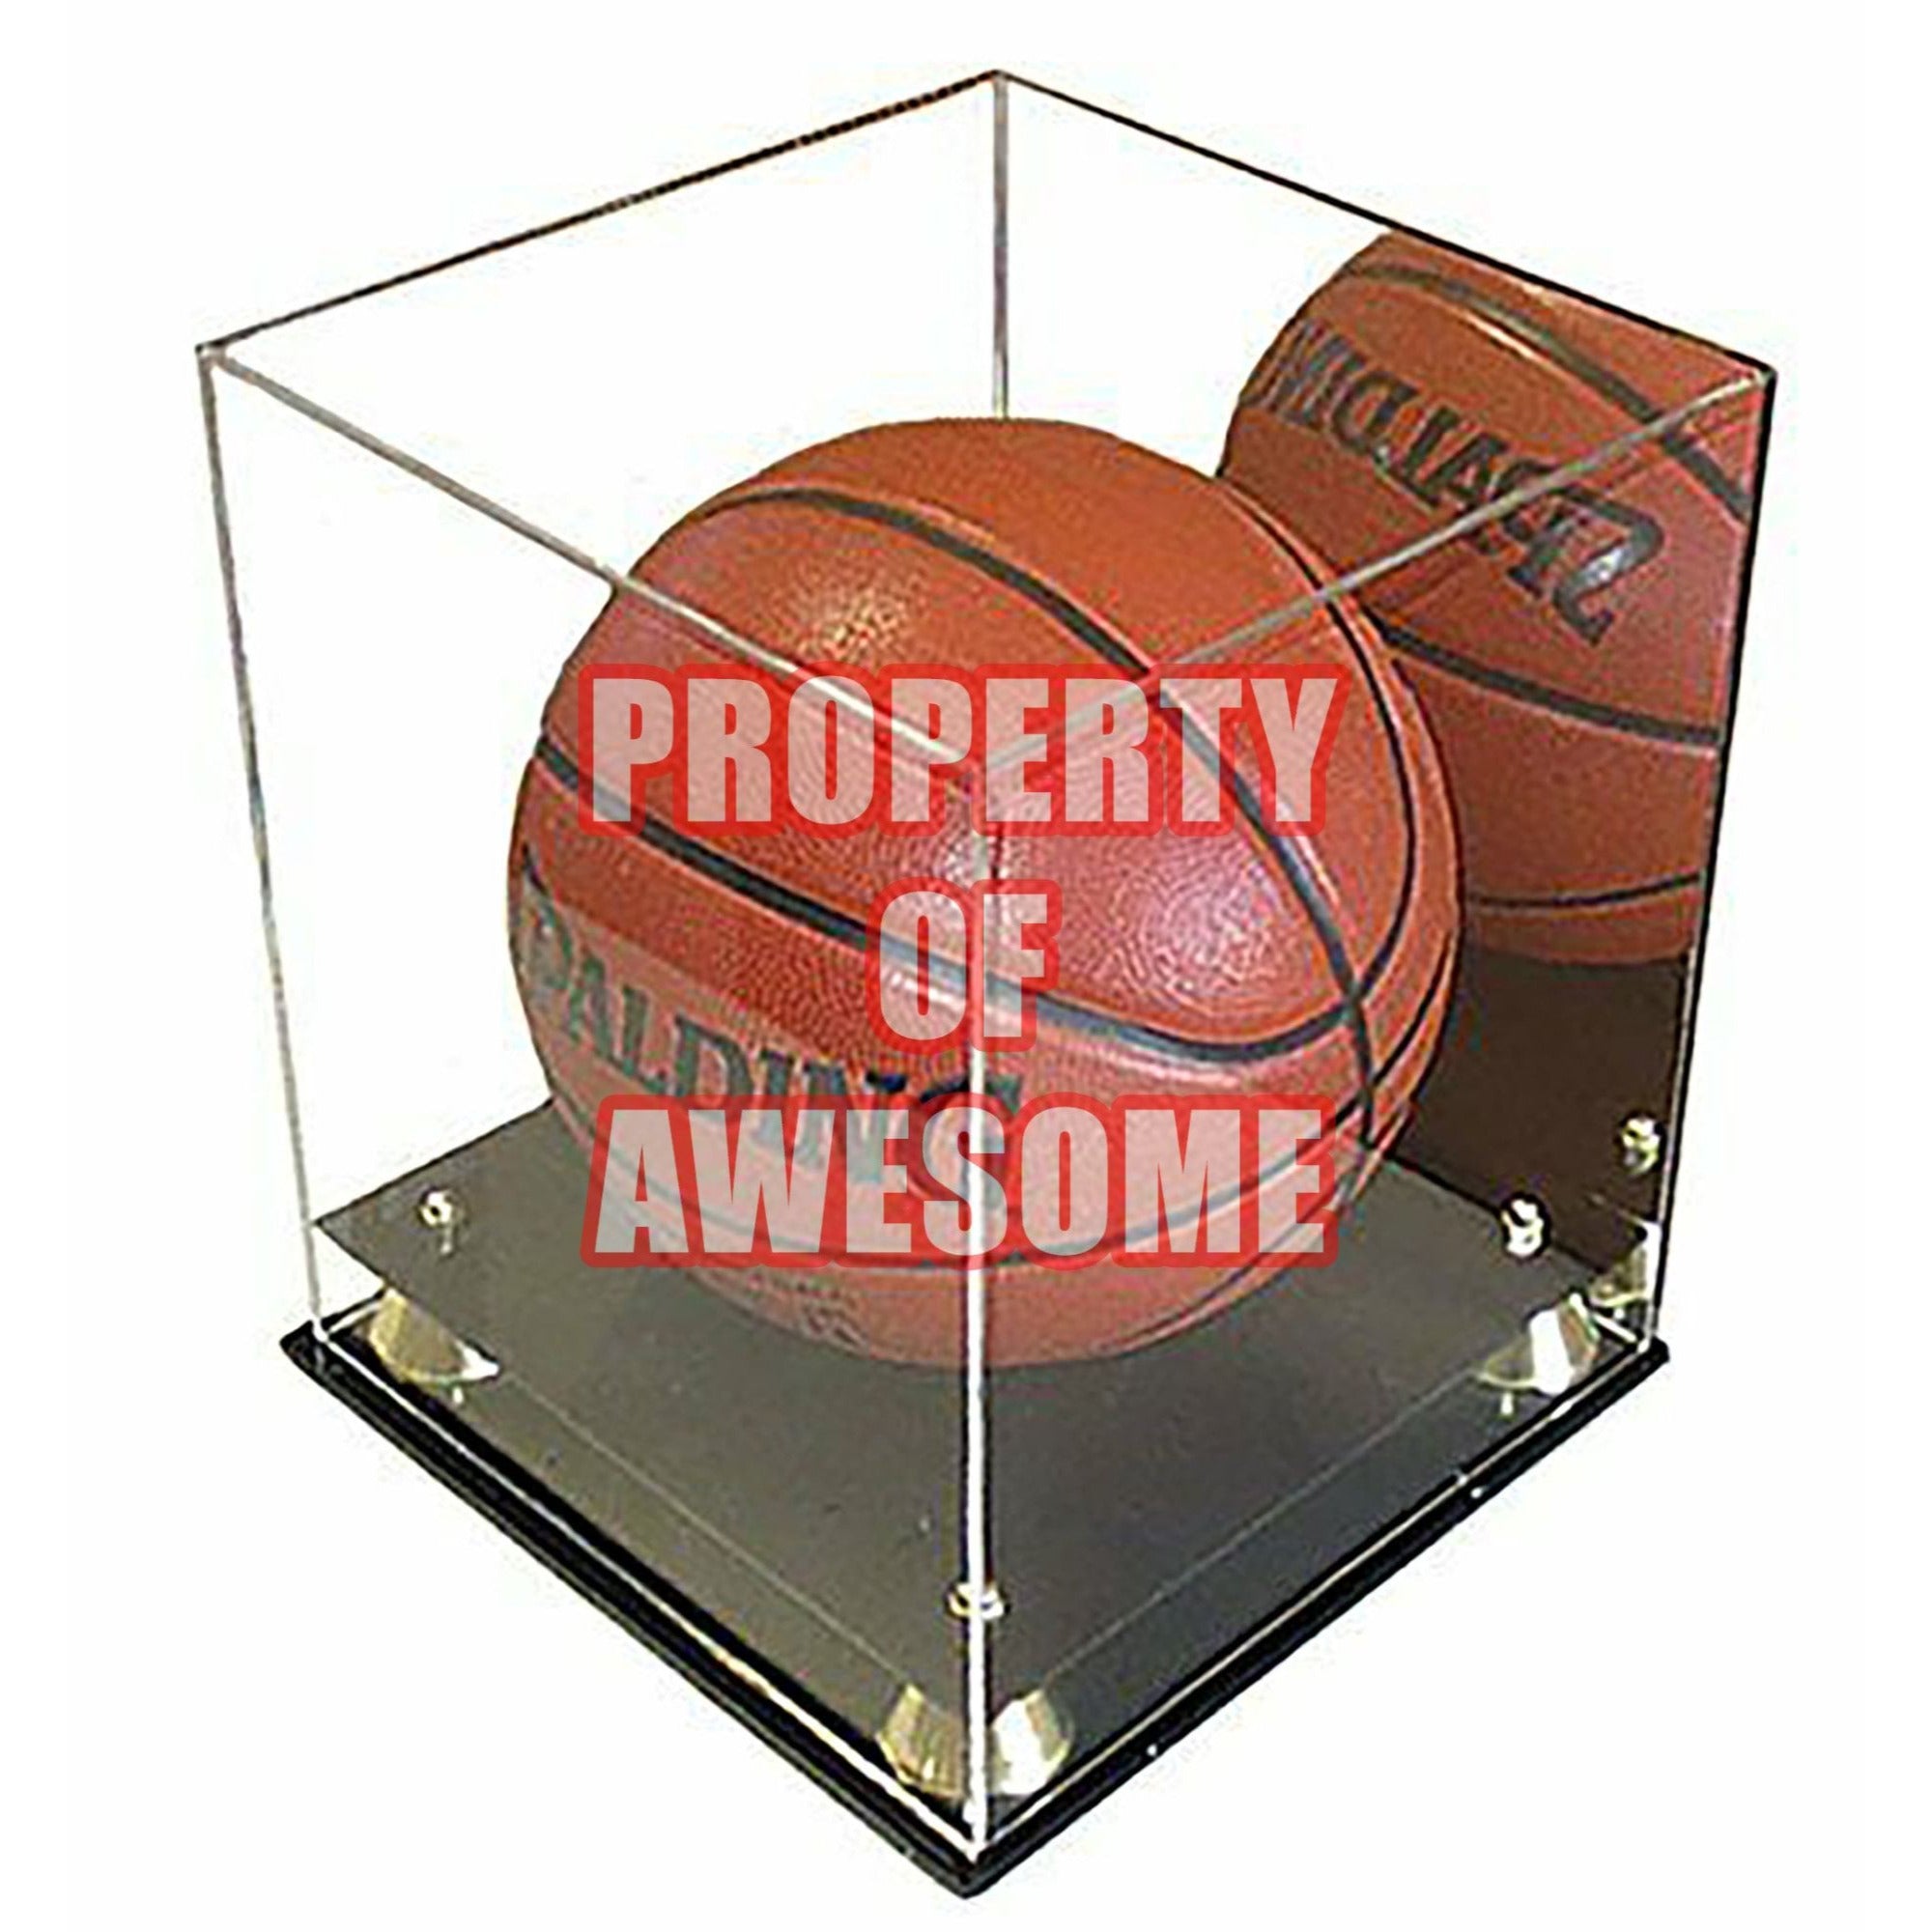 Michael Jordan signed basketball with proof – Awesome Artifacts